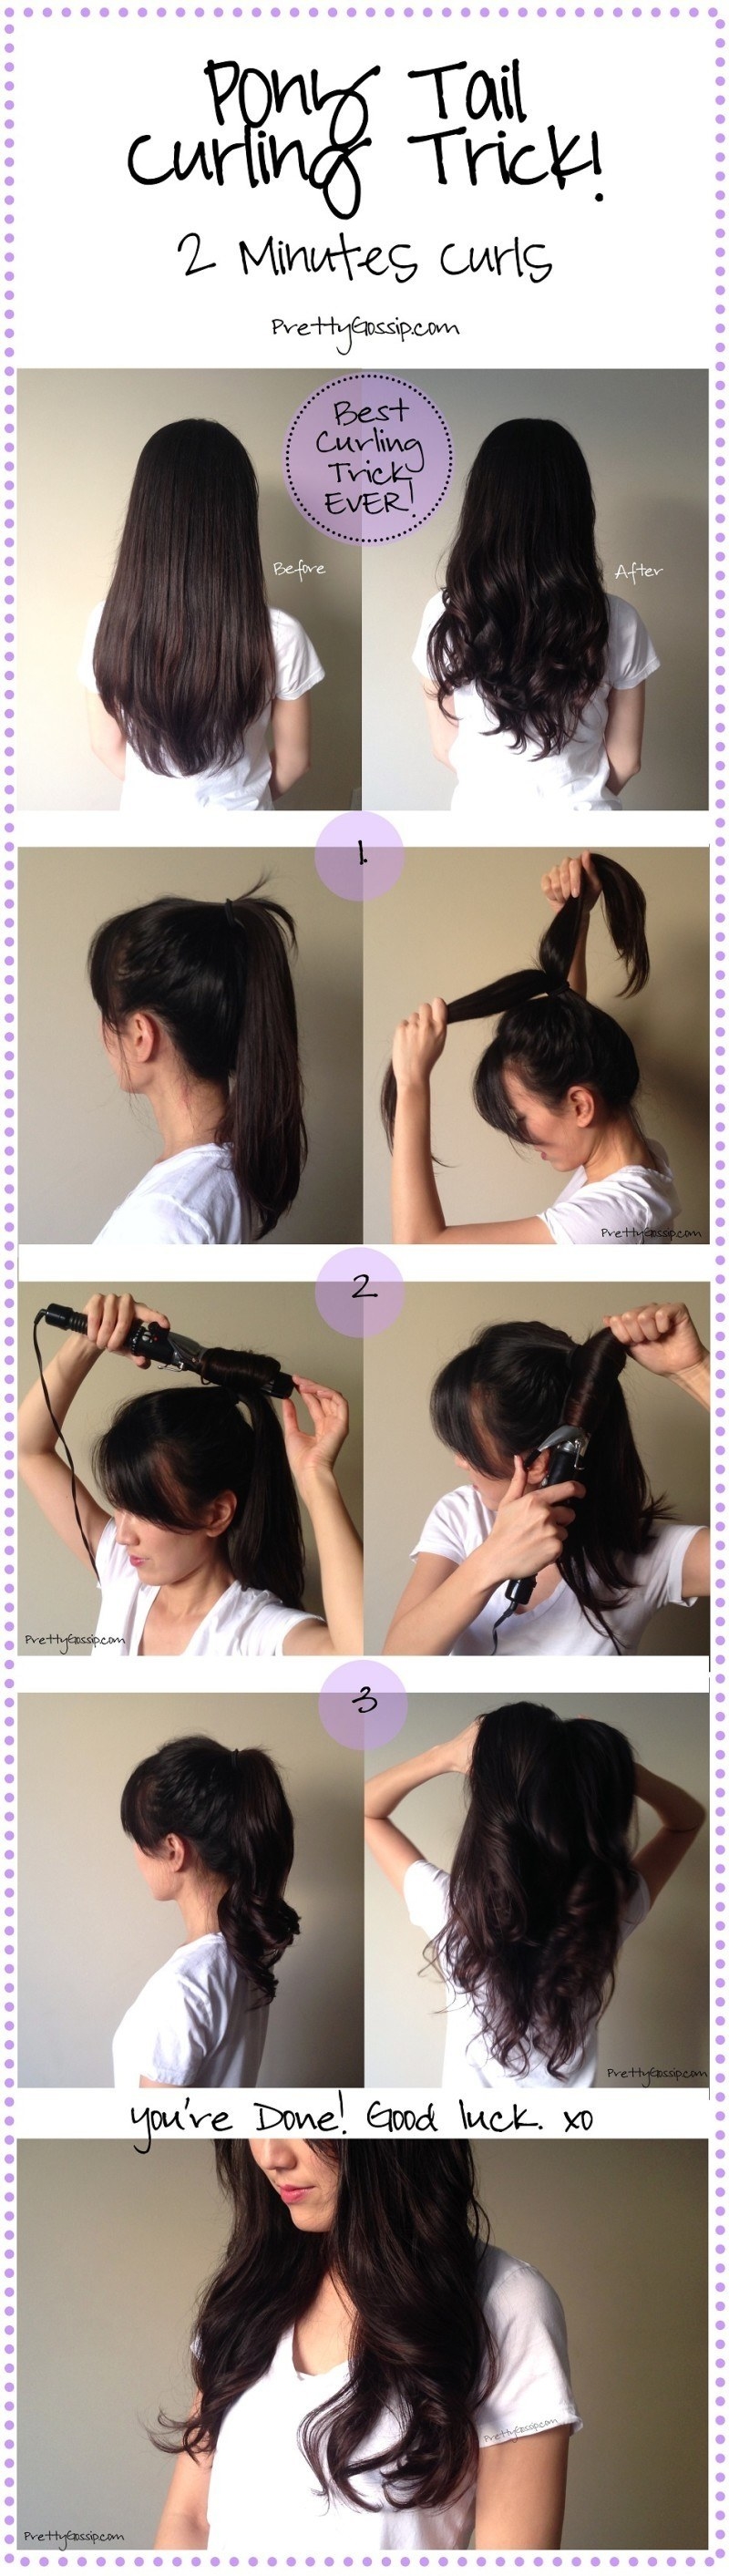 7 Easy Last-Minute Hairstyles Every Girl Should Know - ClickHole